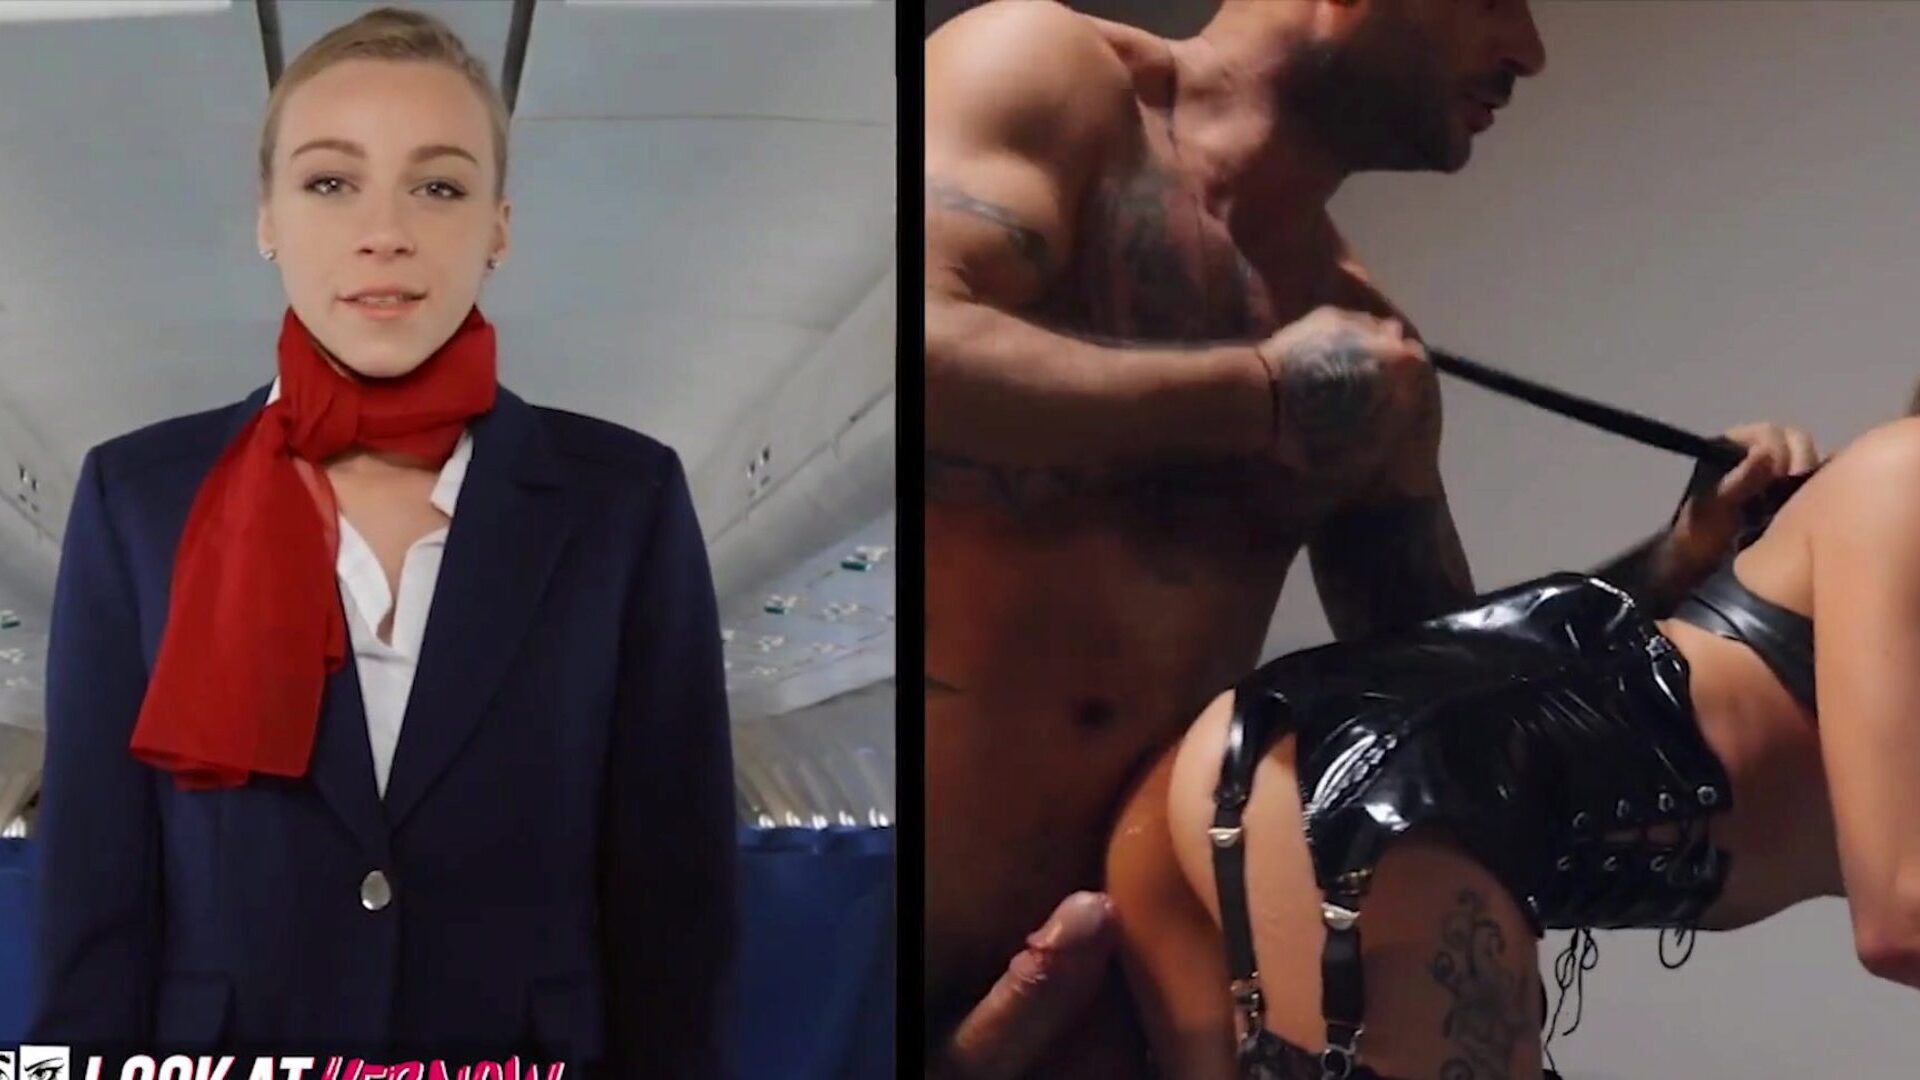 Look at her Now - Uniformed flightattendant Angel Emily trades in for leather Aug 13th 2021